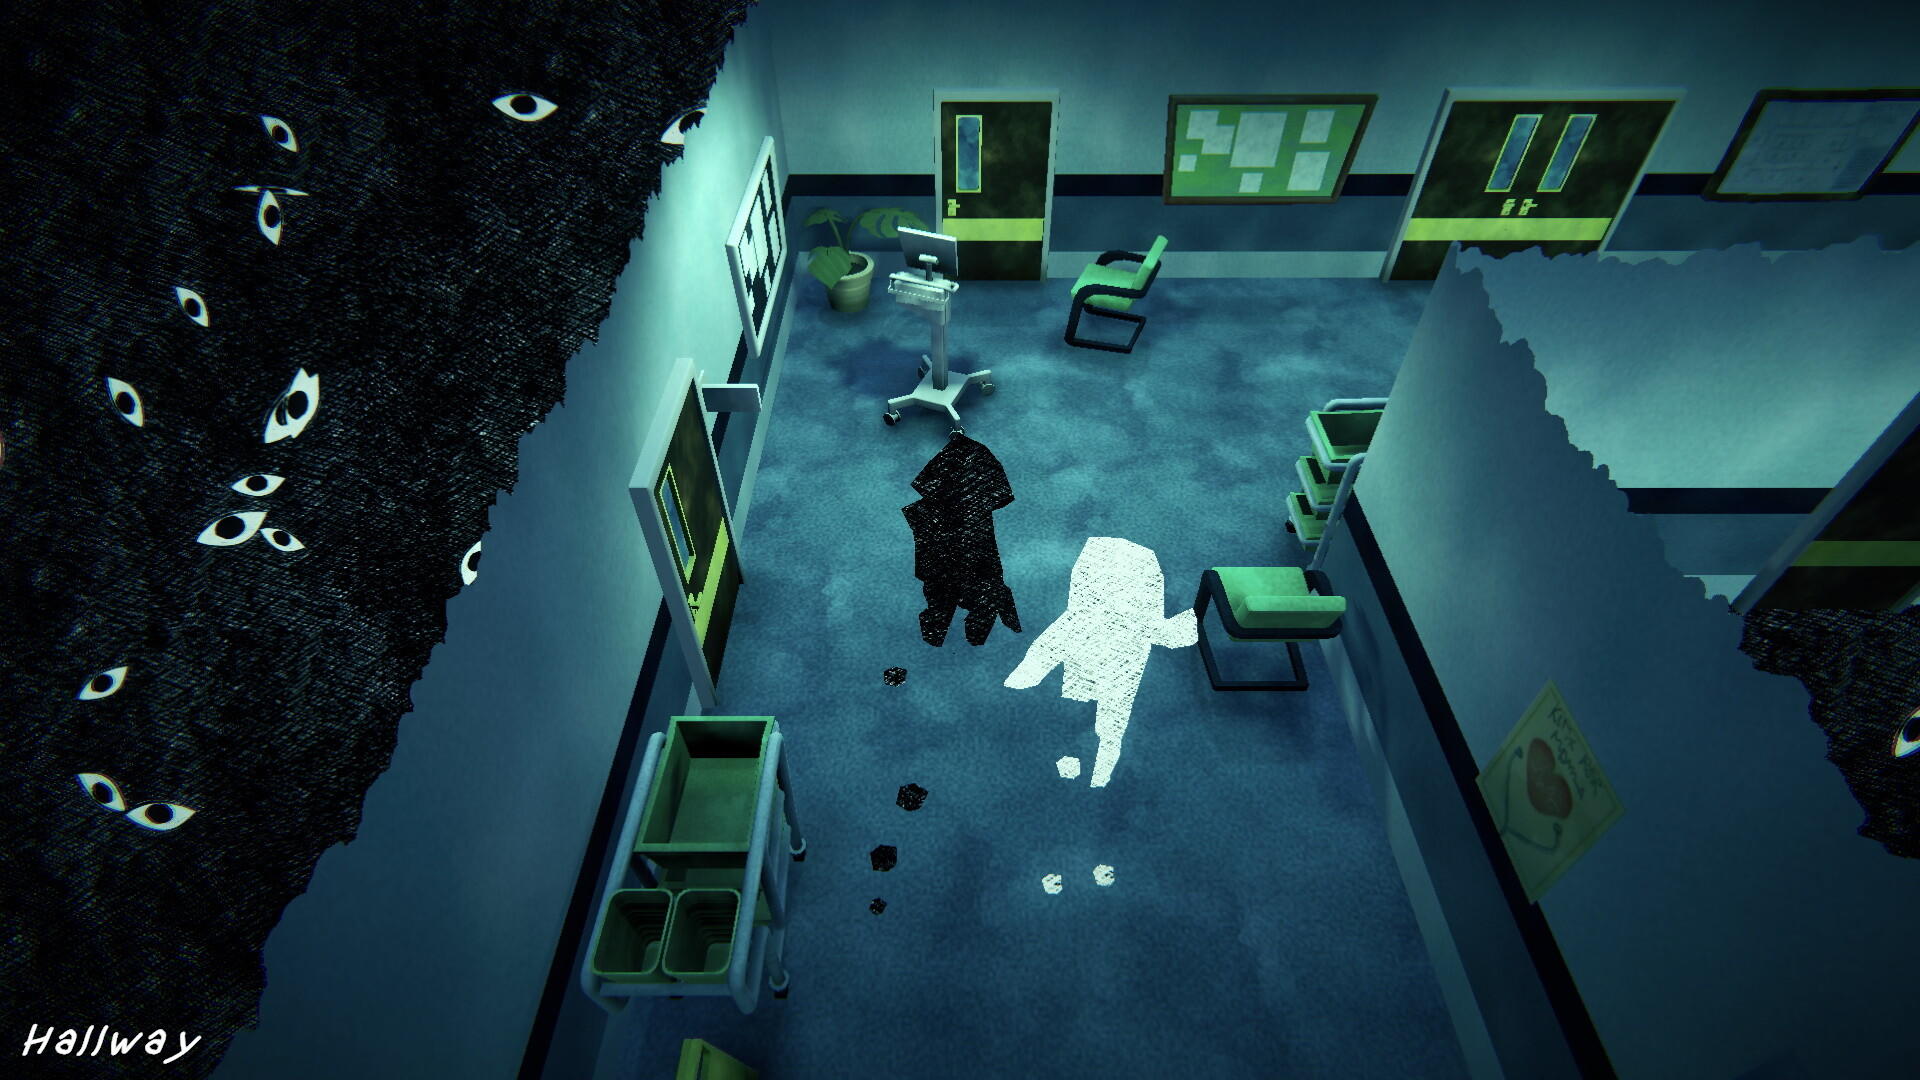 Screenshot of Don't Forget